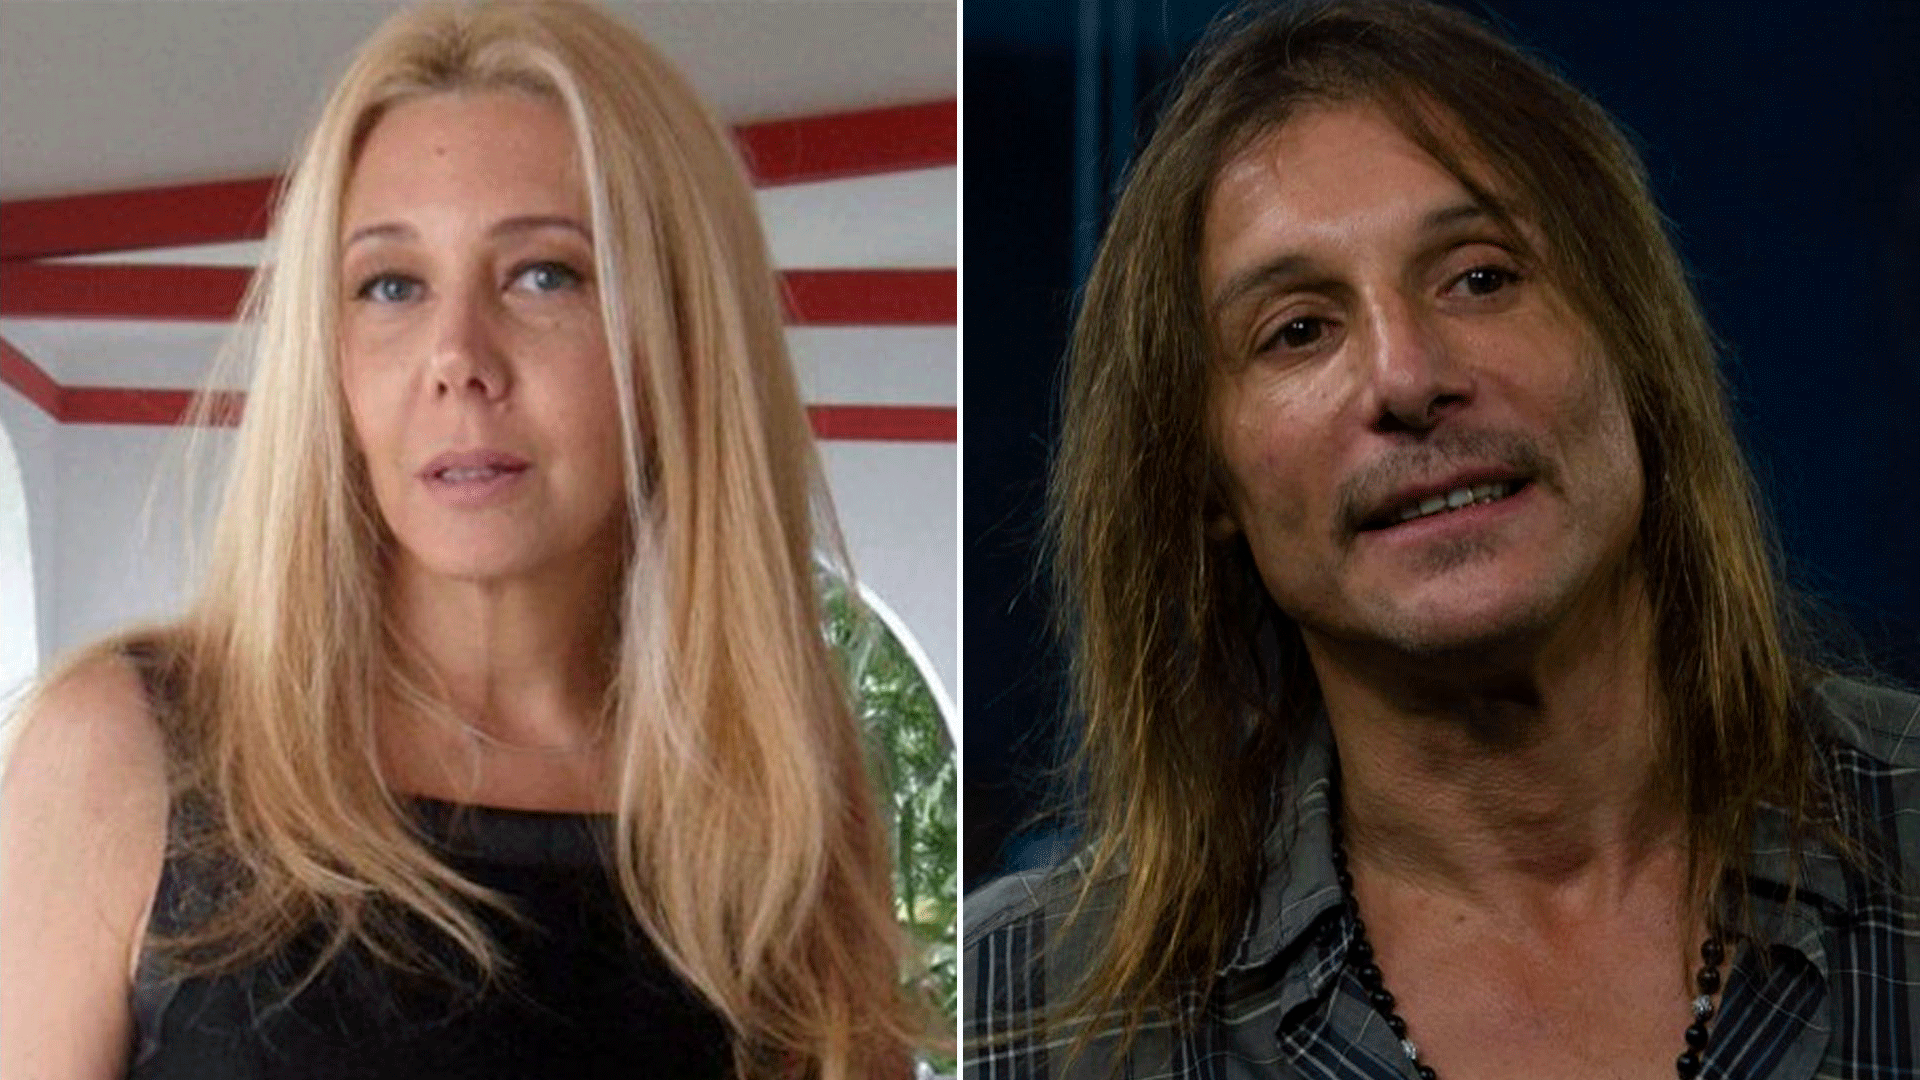 What did Claudio Caniggia say in his inquiry into alleged sexual abuse of Mariana Nannis